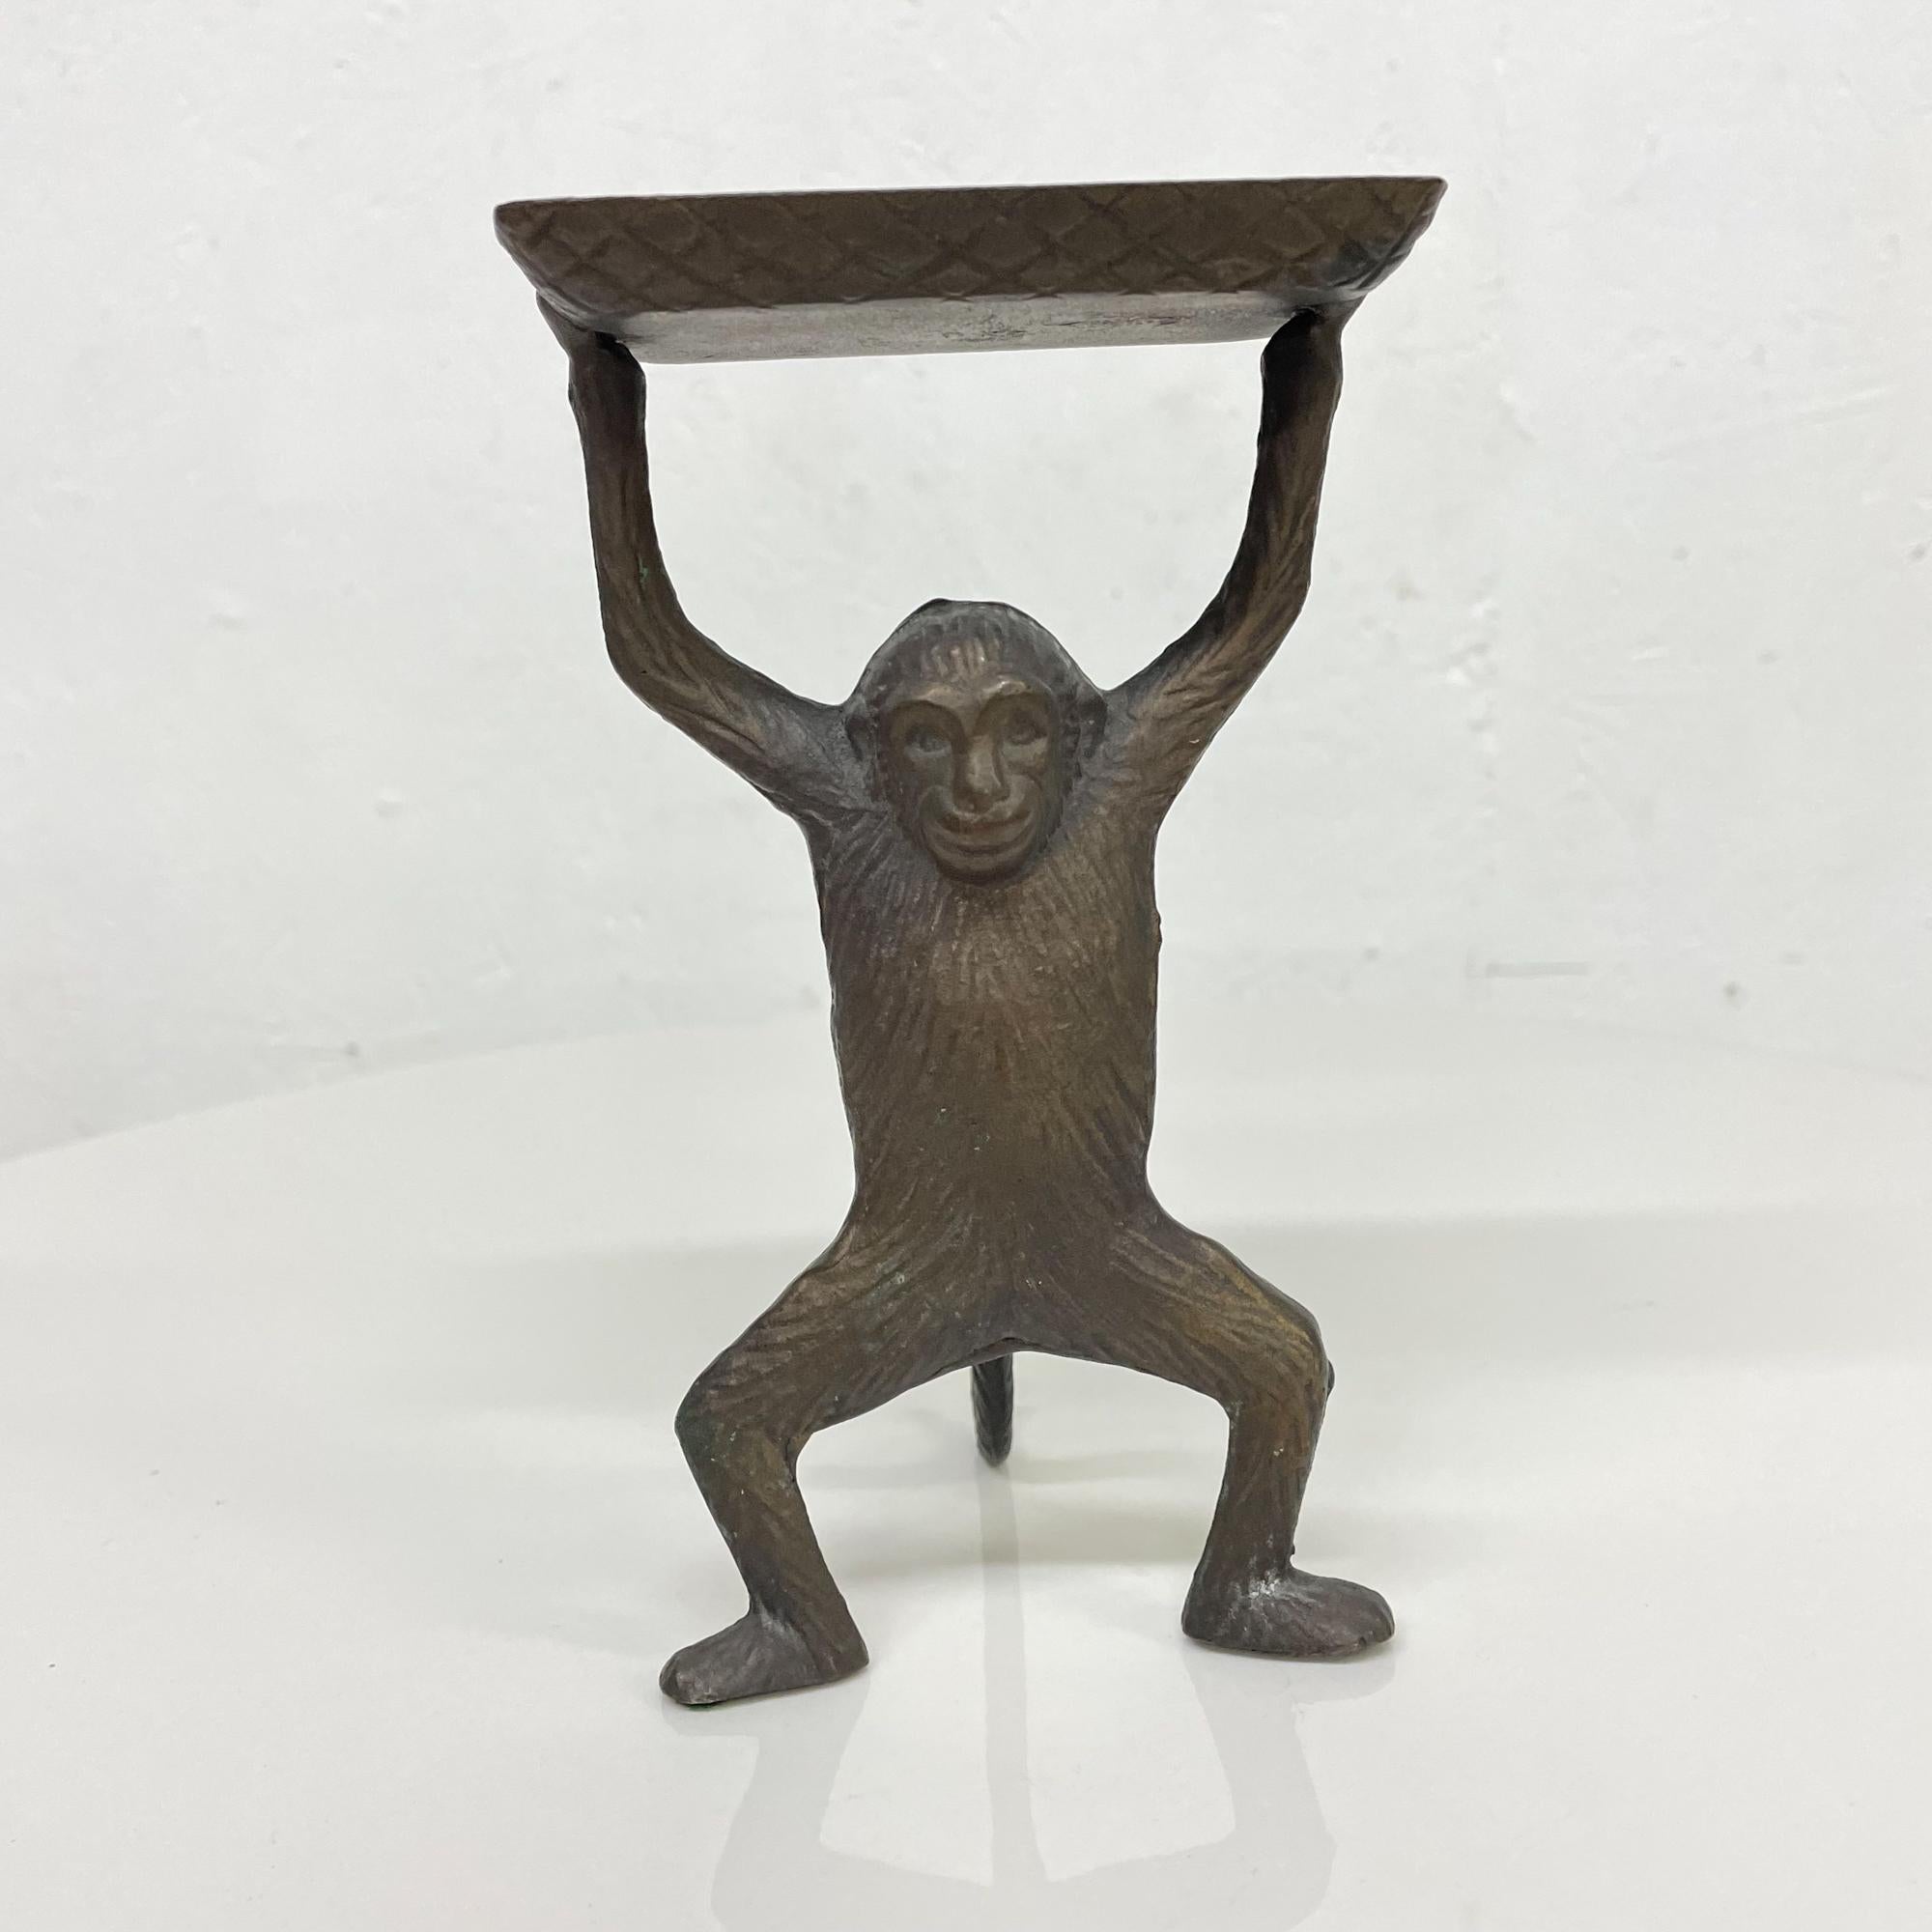 Card holder
Adorable Butler Bronze Monkey Business Card Holder Trinket Tray
7 H x 4 W x 3 D inches
Original Preowned Unrestored Vintage Condition.
See our images.


 